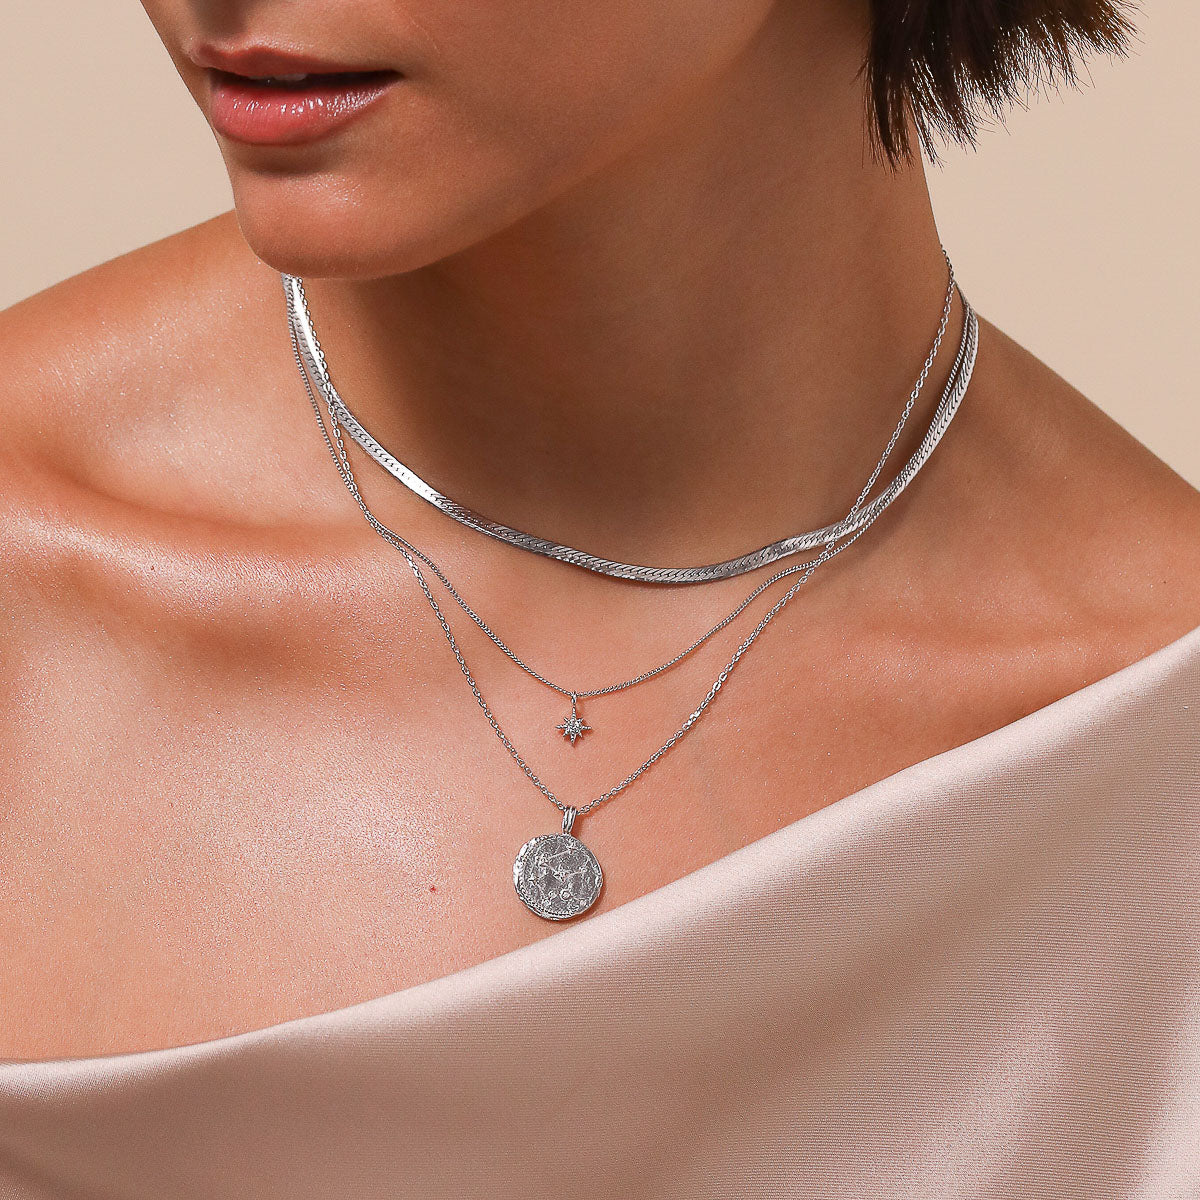 Aquarius Zodiac Pendant Necklace in Silver worn layered with necklaces